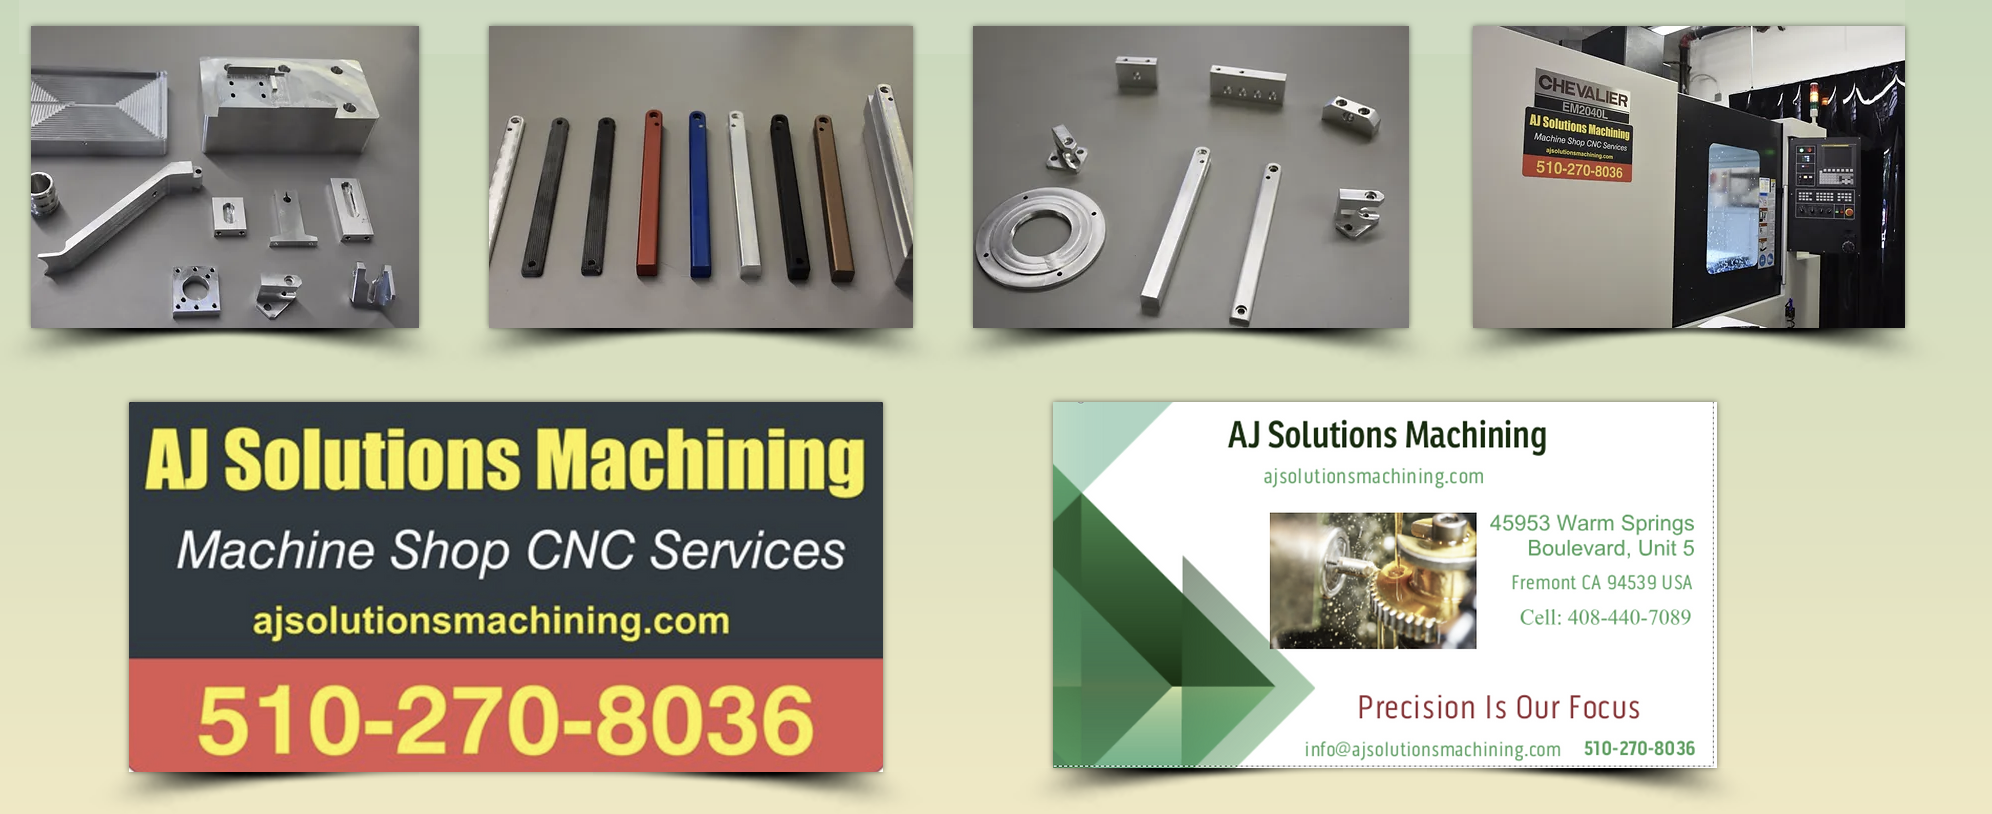 AJ Solutions Machining, Single prototype parts to low volume production, we get you your prototype CNC parts FAST